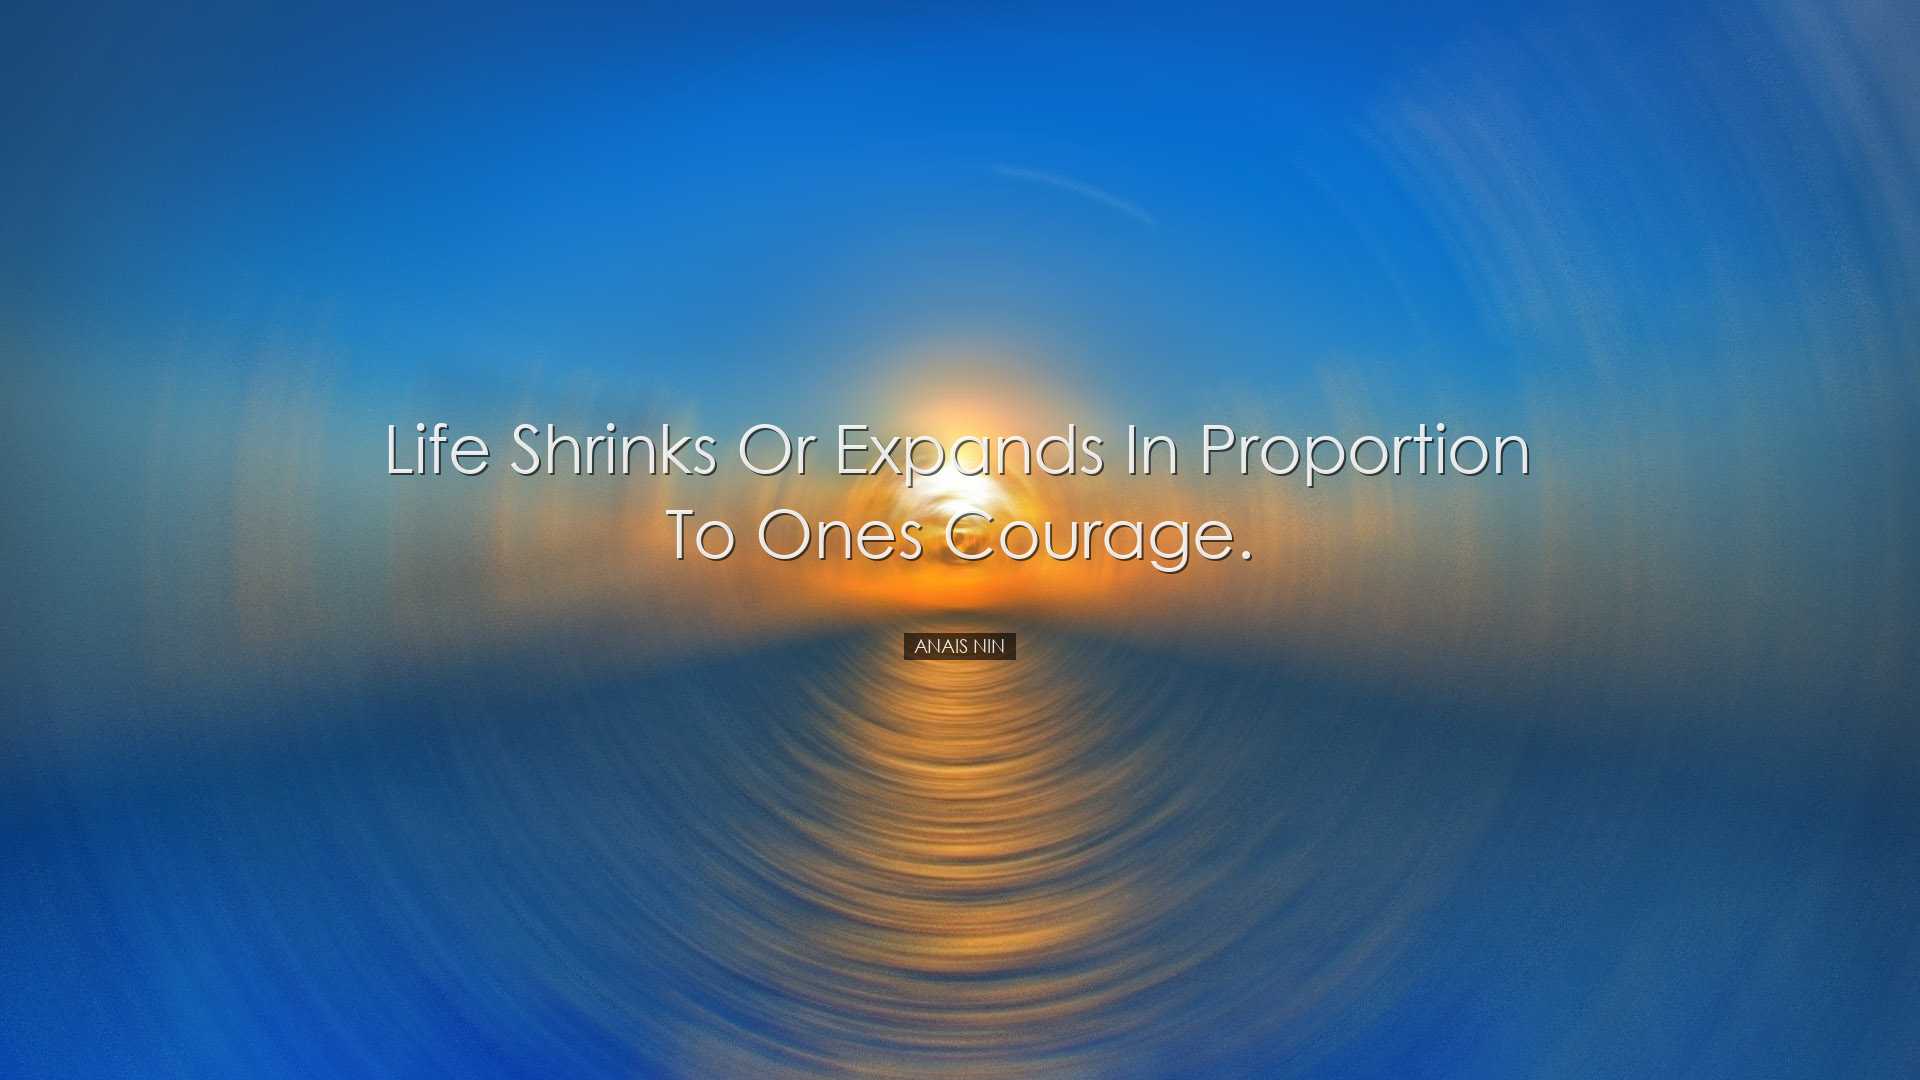 Life shrinks or expands in proportion to ones courage. - Anais Nin